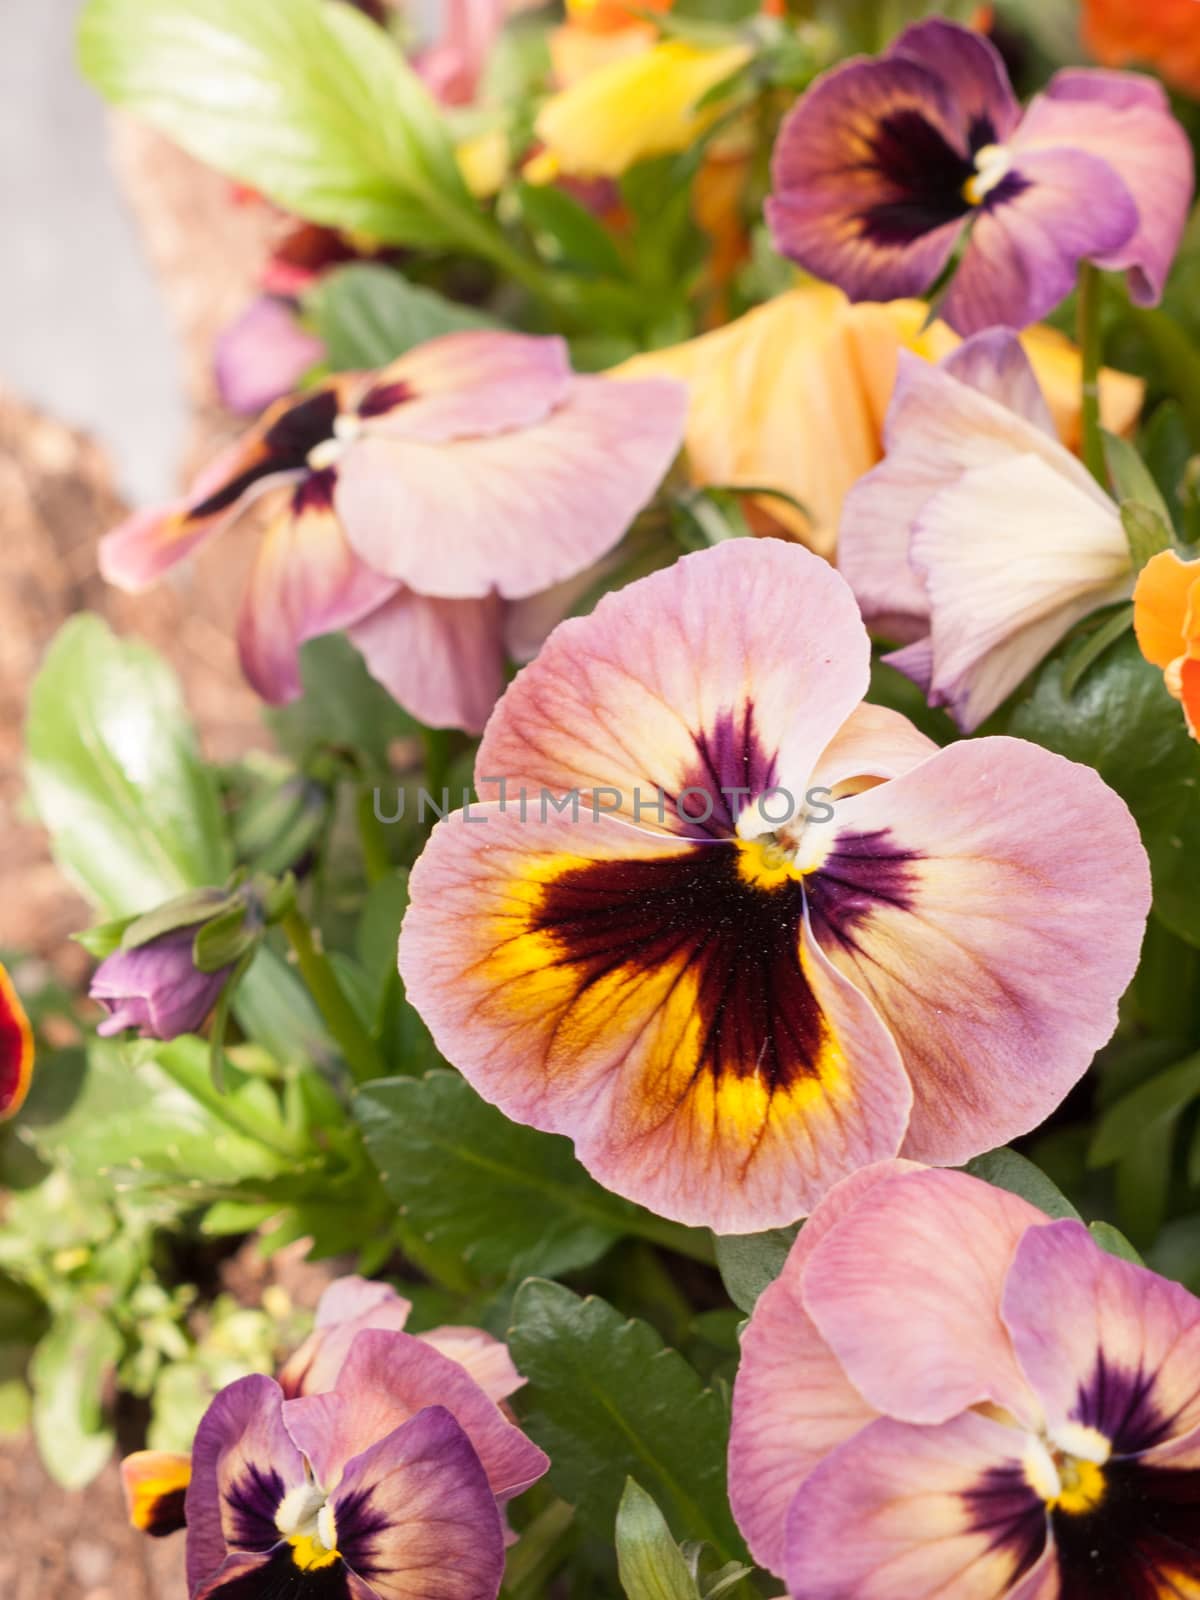 Some Pansies in a Plant pot in the Spring by callumrc